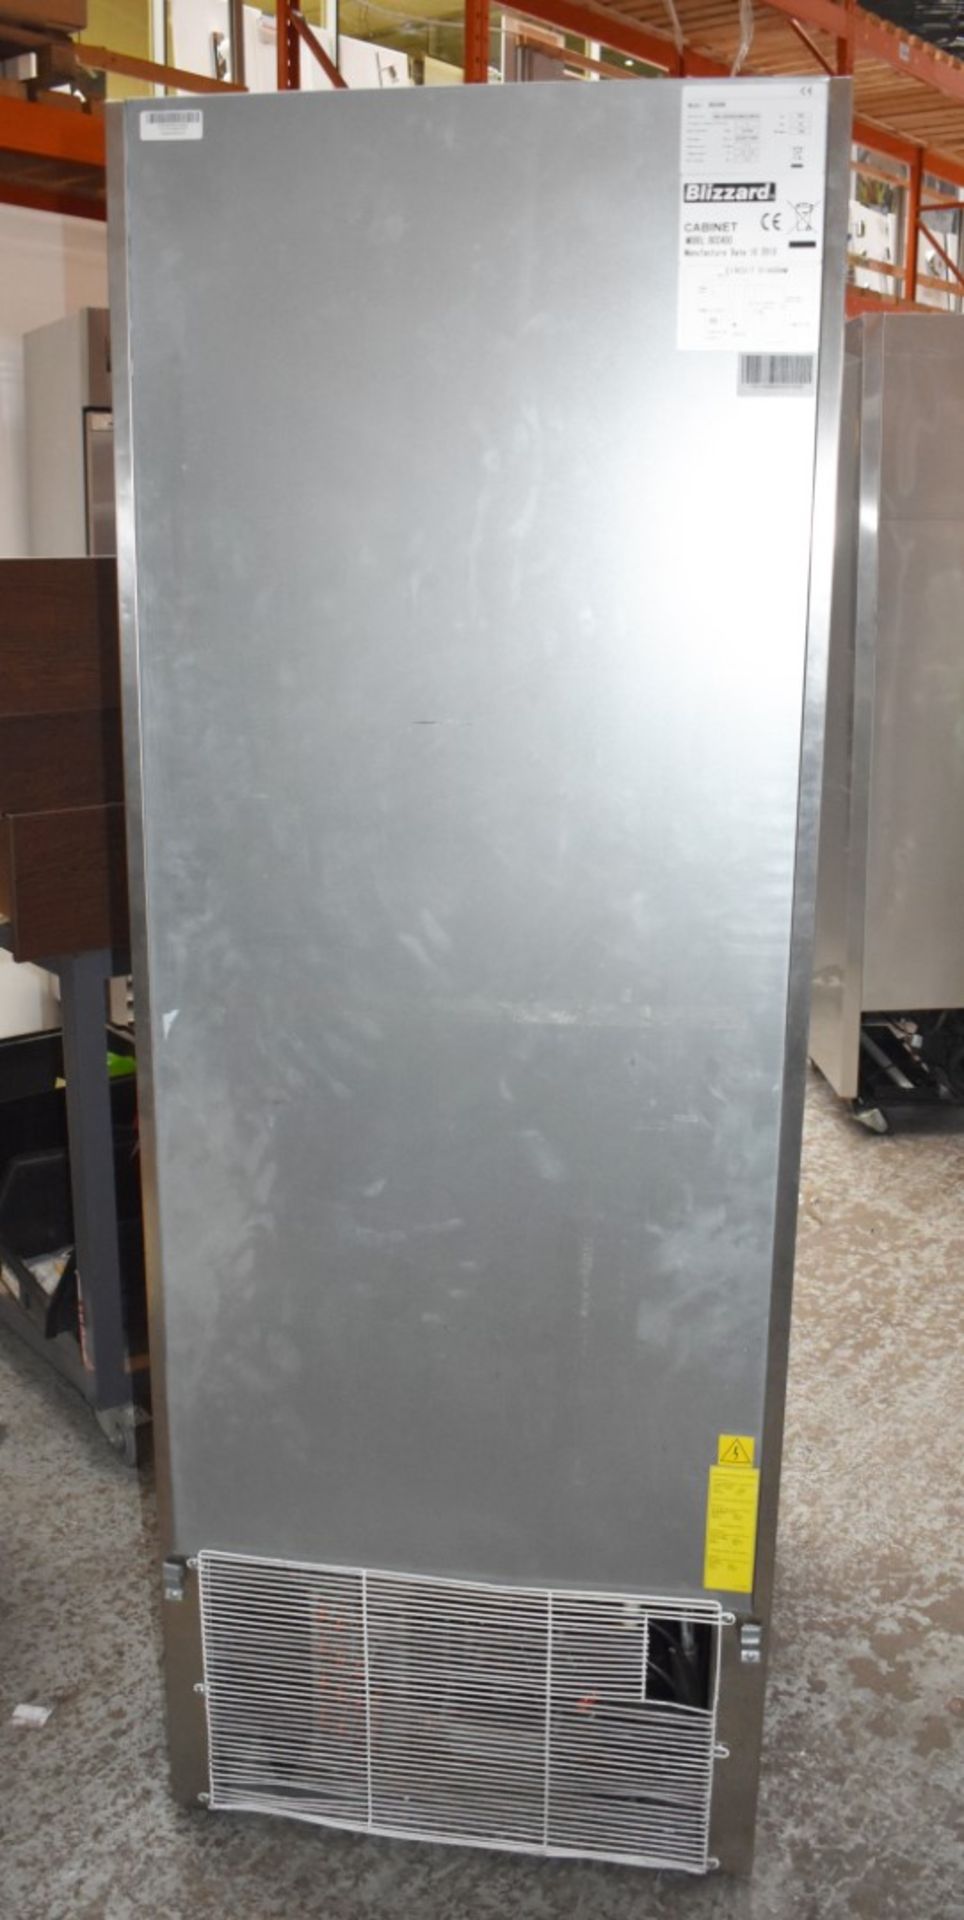 1 x Blizzard BCC400 Upright Commercial Fridge - Stainless Steel Finish - 230v - H200 x W68 x D71 cms - Image 2 of 7